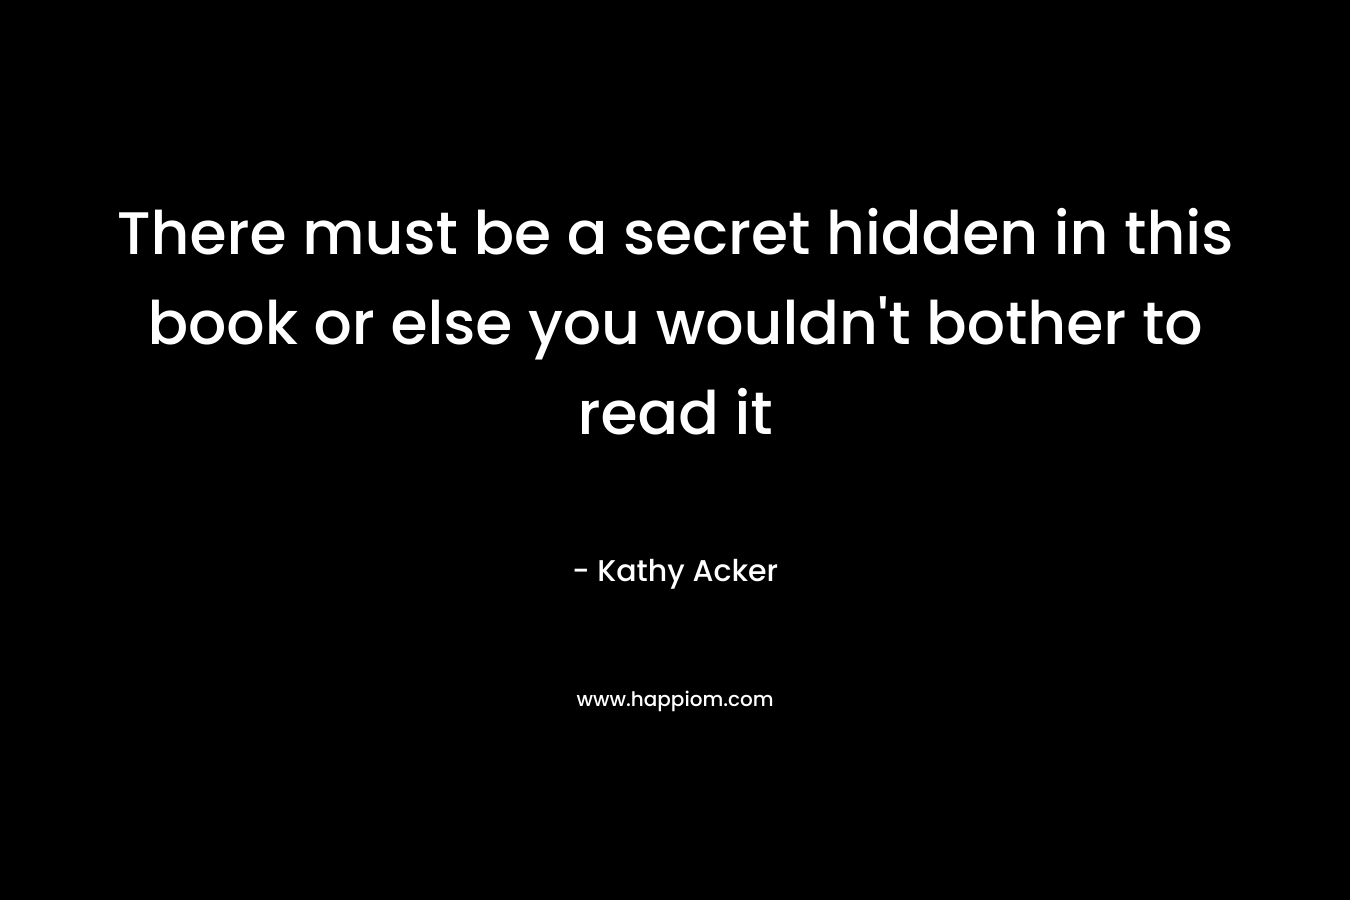 There must be a secret hidden in this book or else you wouldn’t bother to read it – Kathy Acker